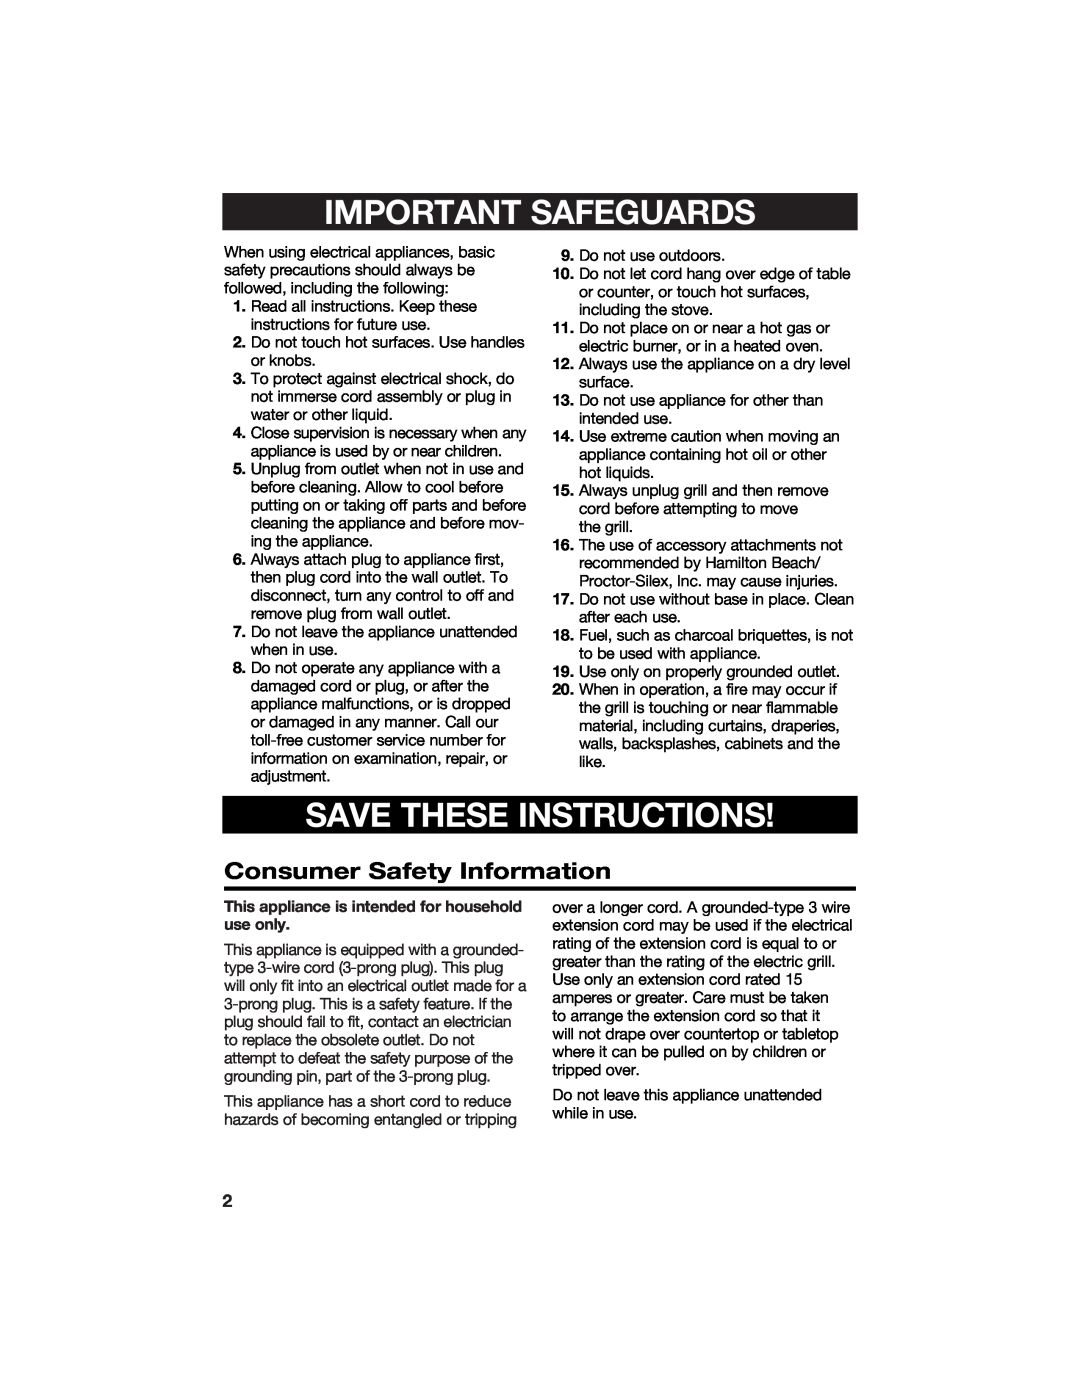 Hamilton Beach 840068300 manual Important Safeguards, Save These Instructions, Consumer Safety Information 